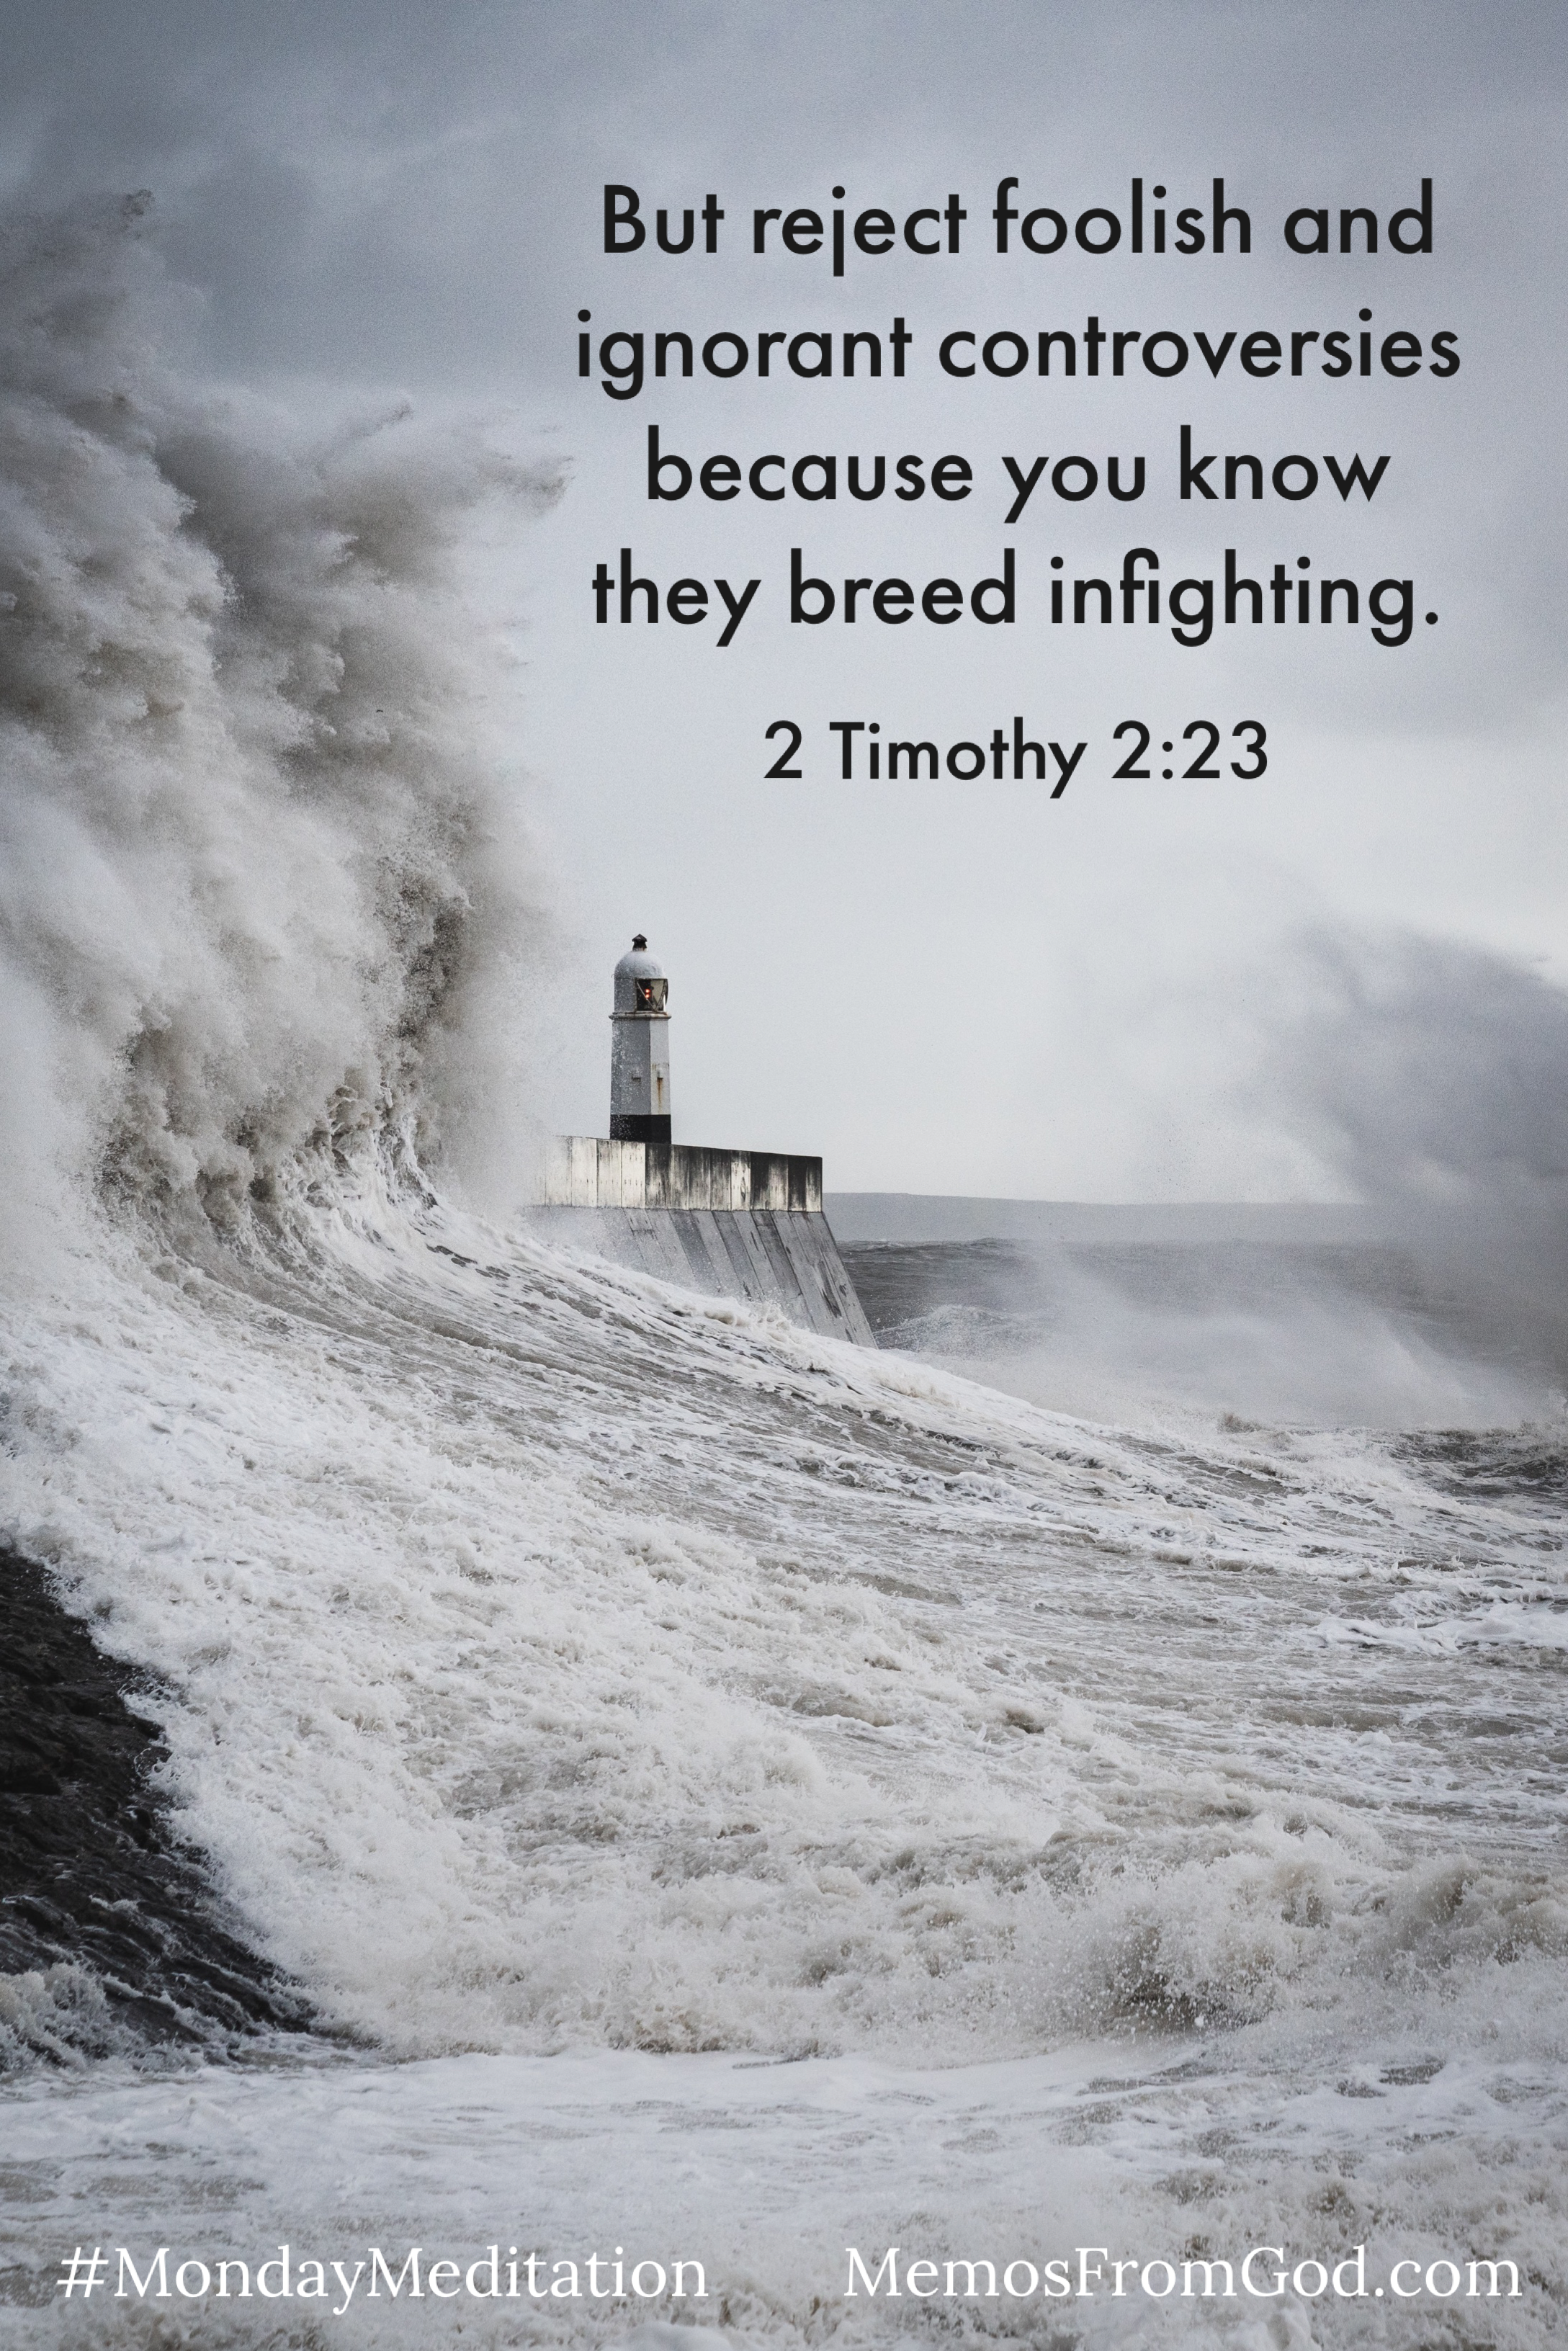 A lighthouse on a pier seems small compared to the waves that are crashing around it. Caption: But reject foolish and ignorant controversies because you know they breed infighting. 2 Timothy 2:23